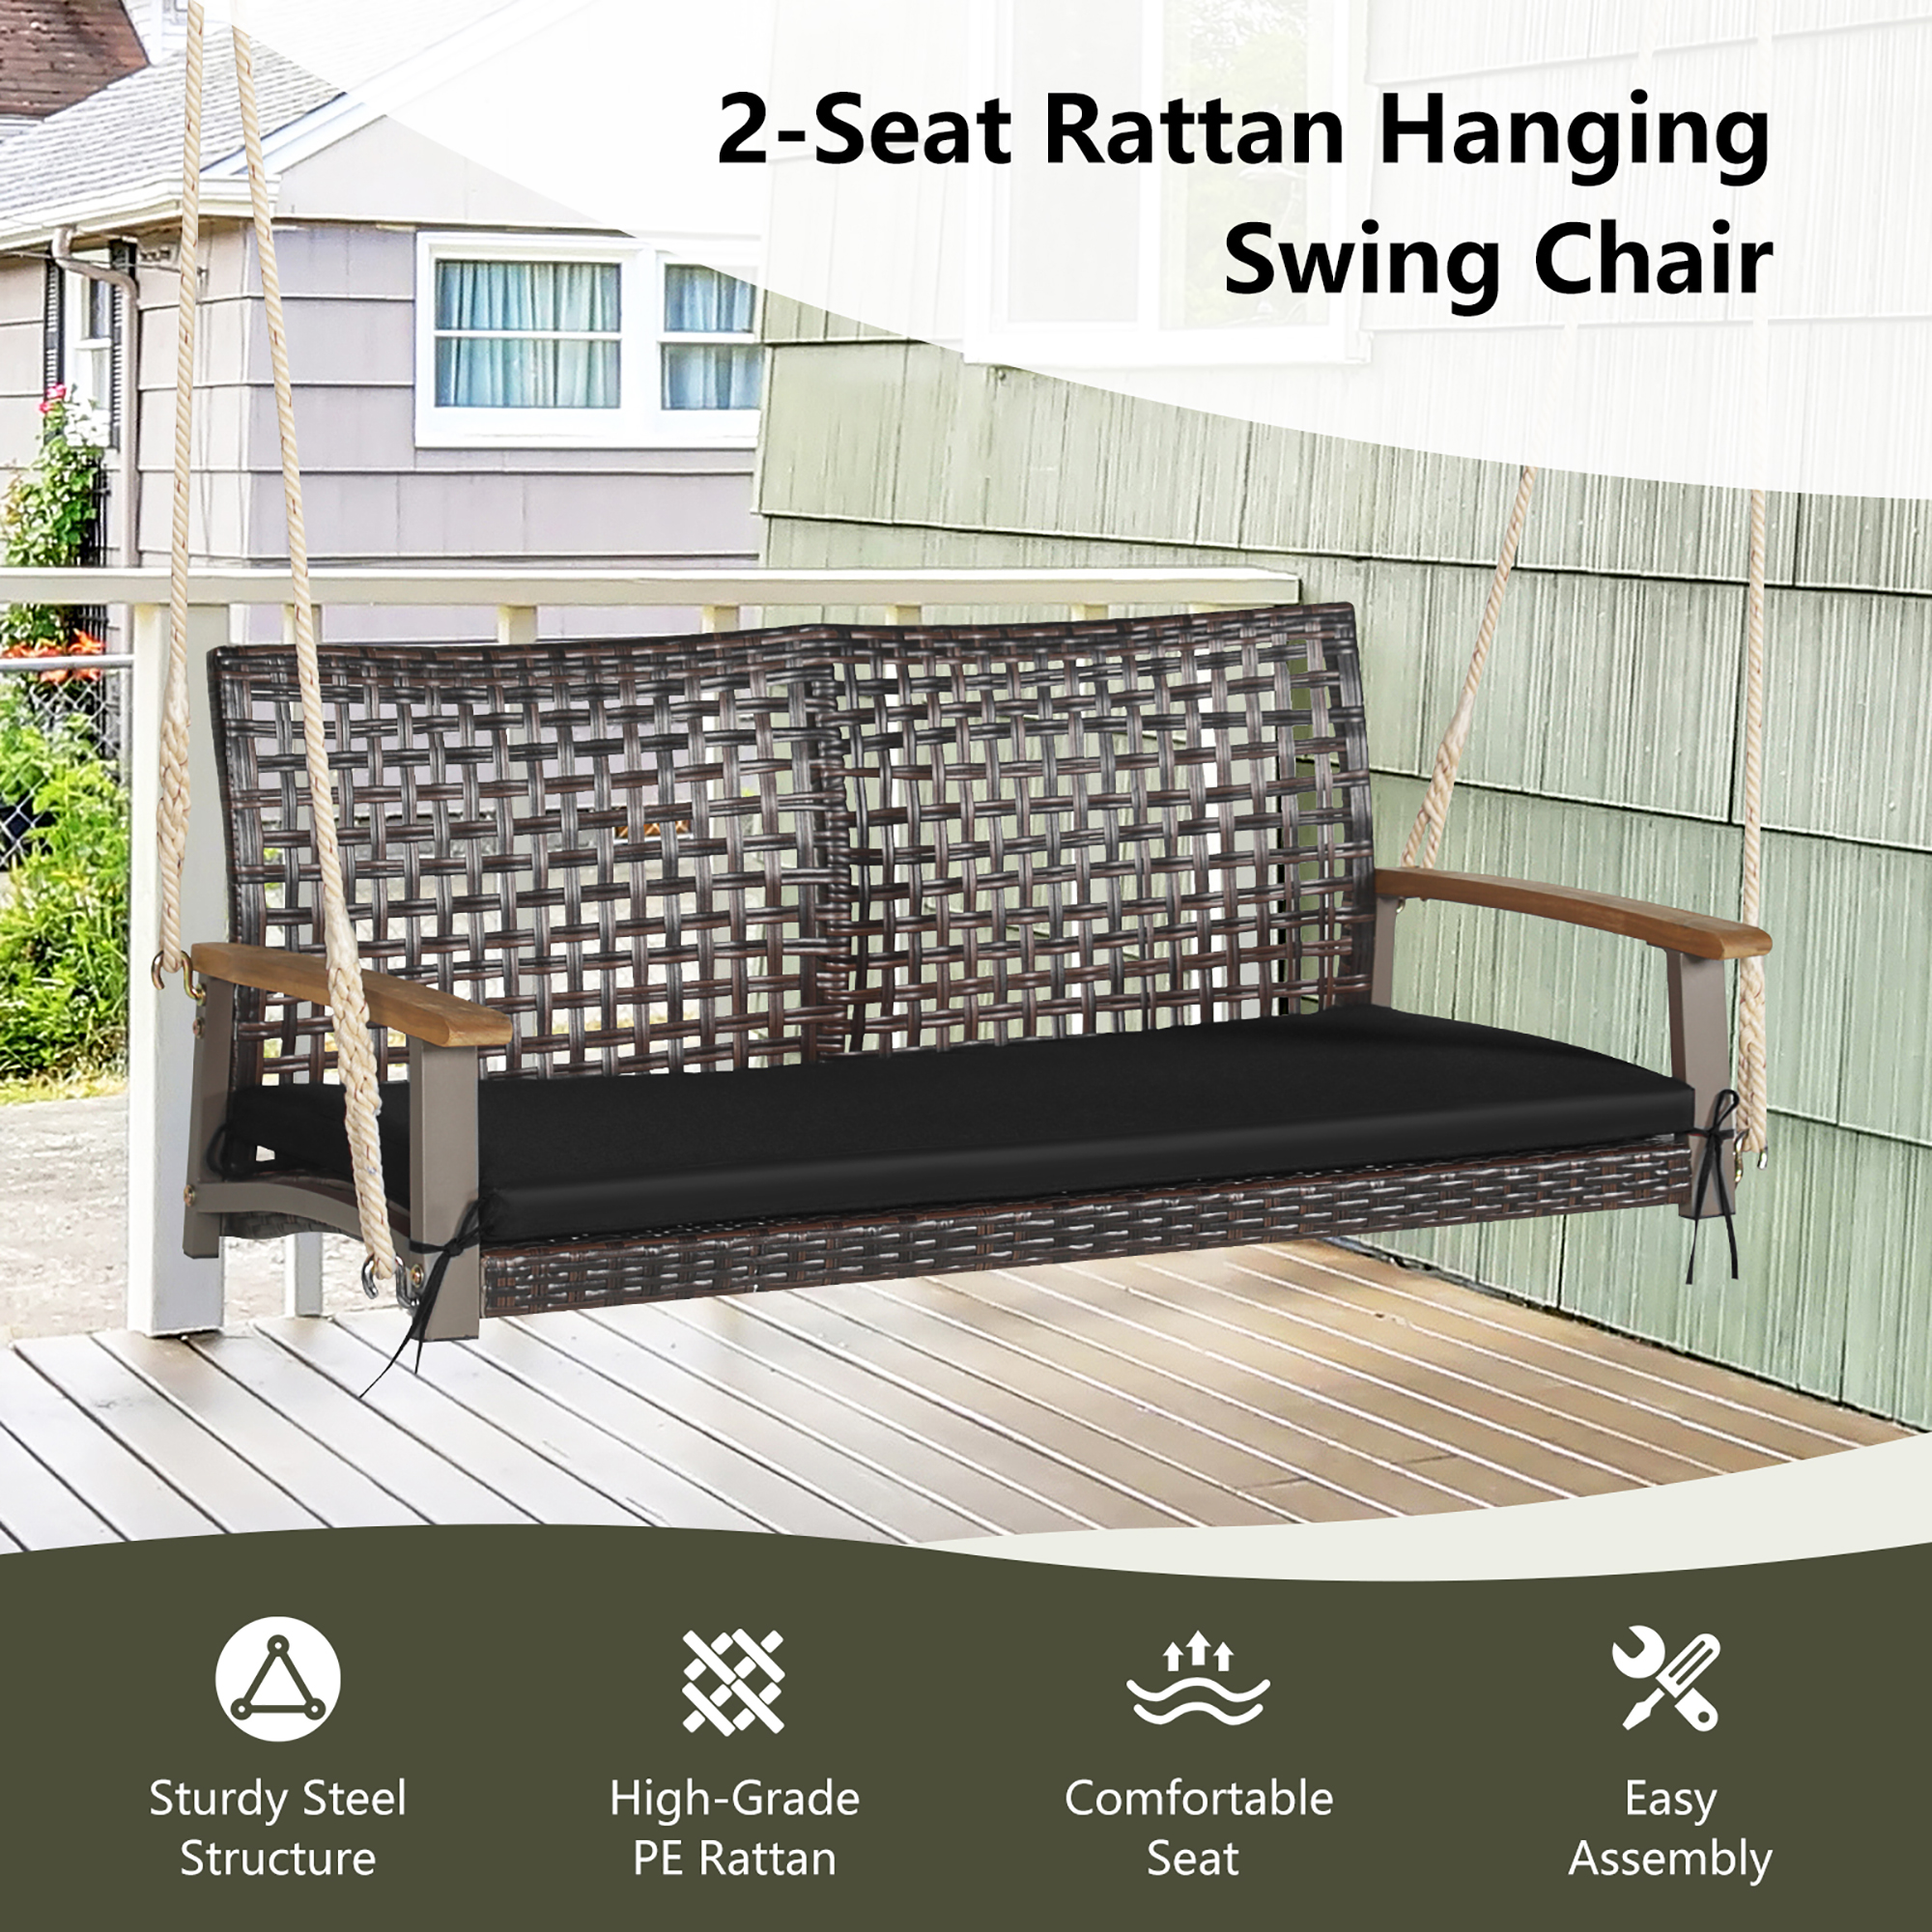 Gymax 2-Seat Rattan Porch Swing Chair Outdoor Wicker Swing Bench W/ Seat Cushion Black - image 4 of 8